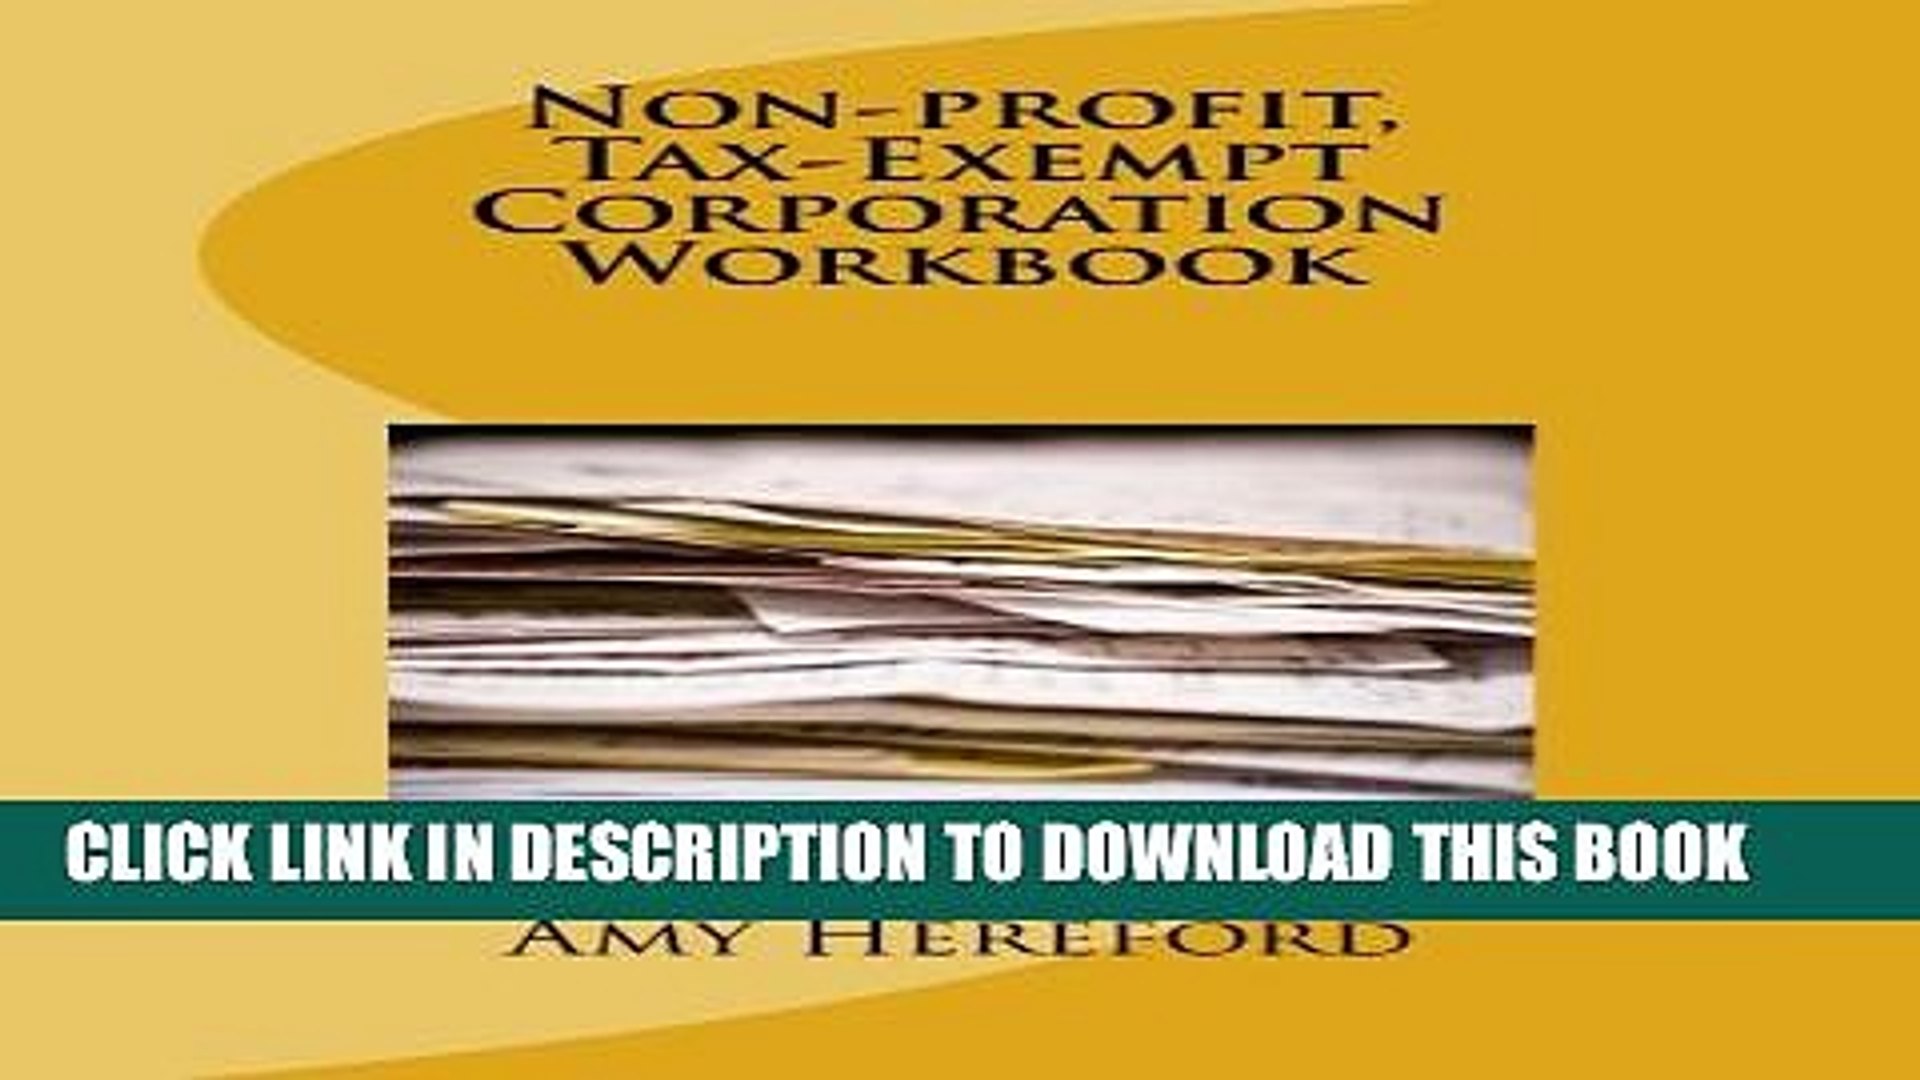 ⁣Collection Book Non-profit, Tax-Exempt Corporation Workbook